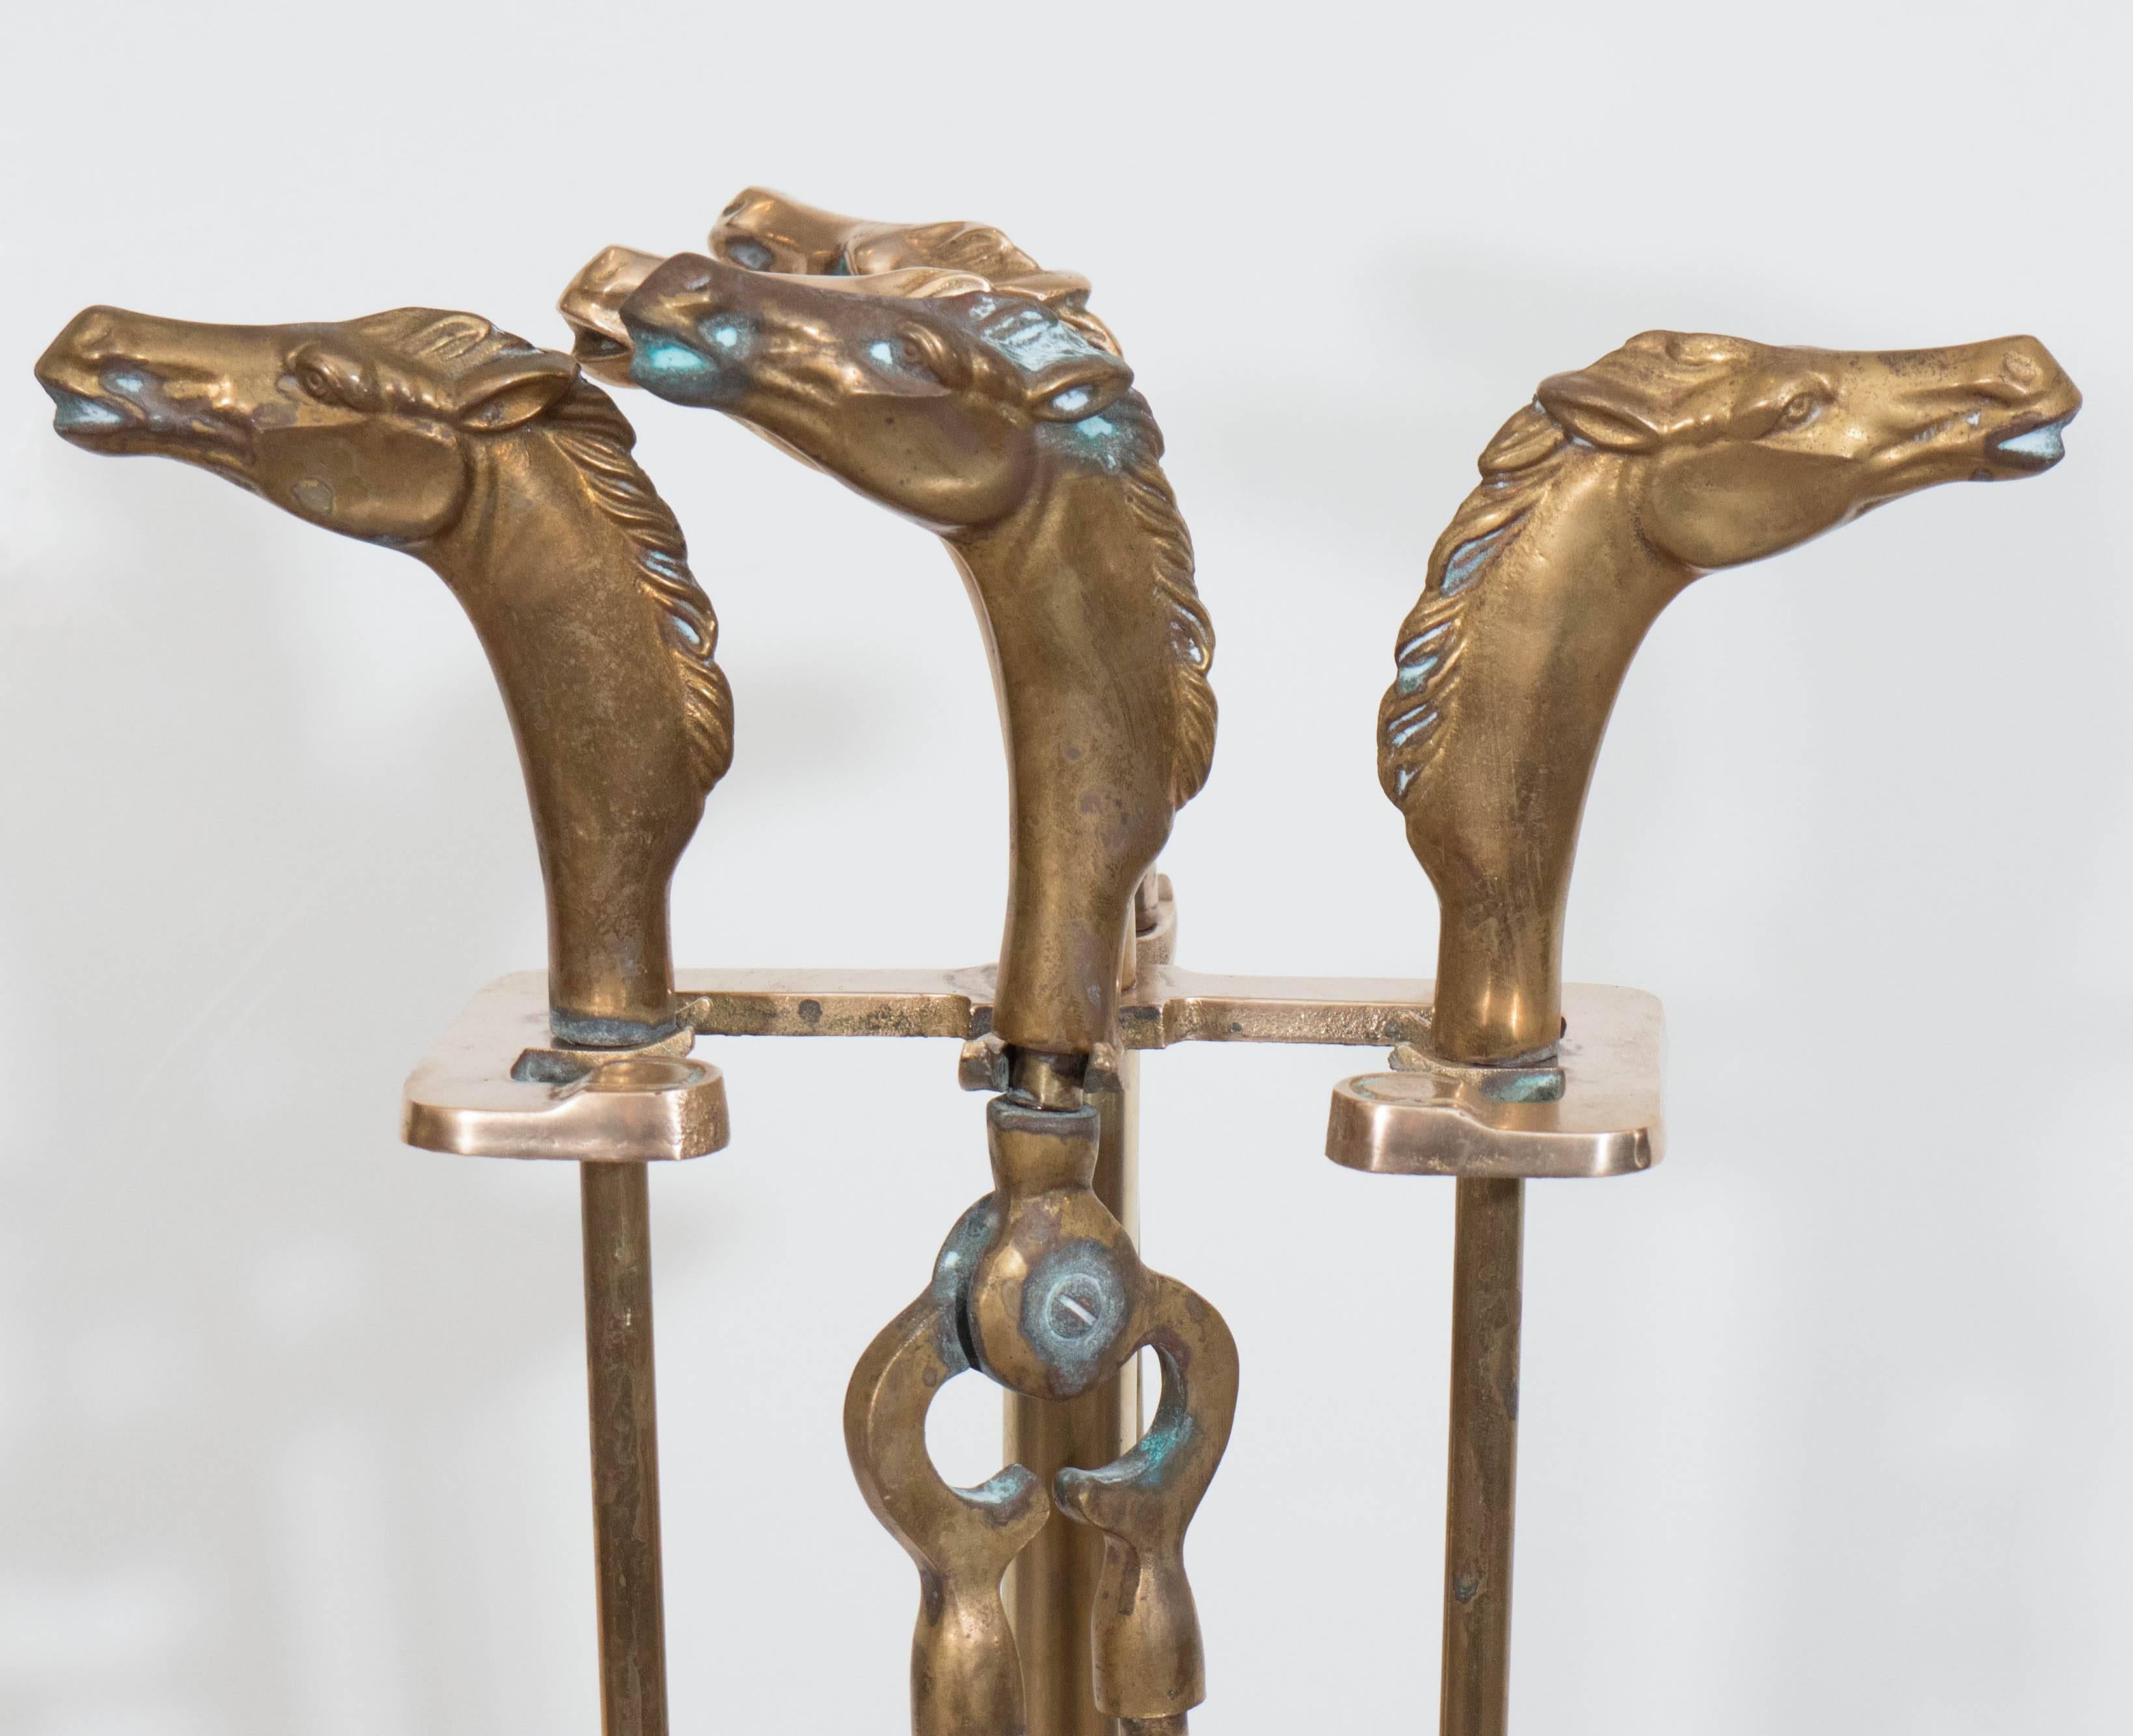 This set of brass fireplace tools, produced circa 1950s, includes broom, tongs, shovel and poker on elaborate stand with gallery to the base, each with beautifully detailed horse head motif as handle. Despite some loss of broom bristles, as well as